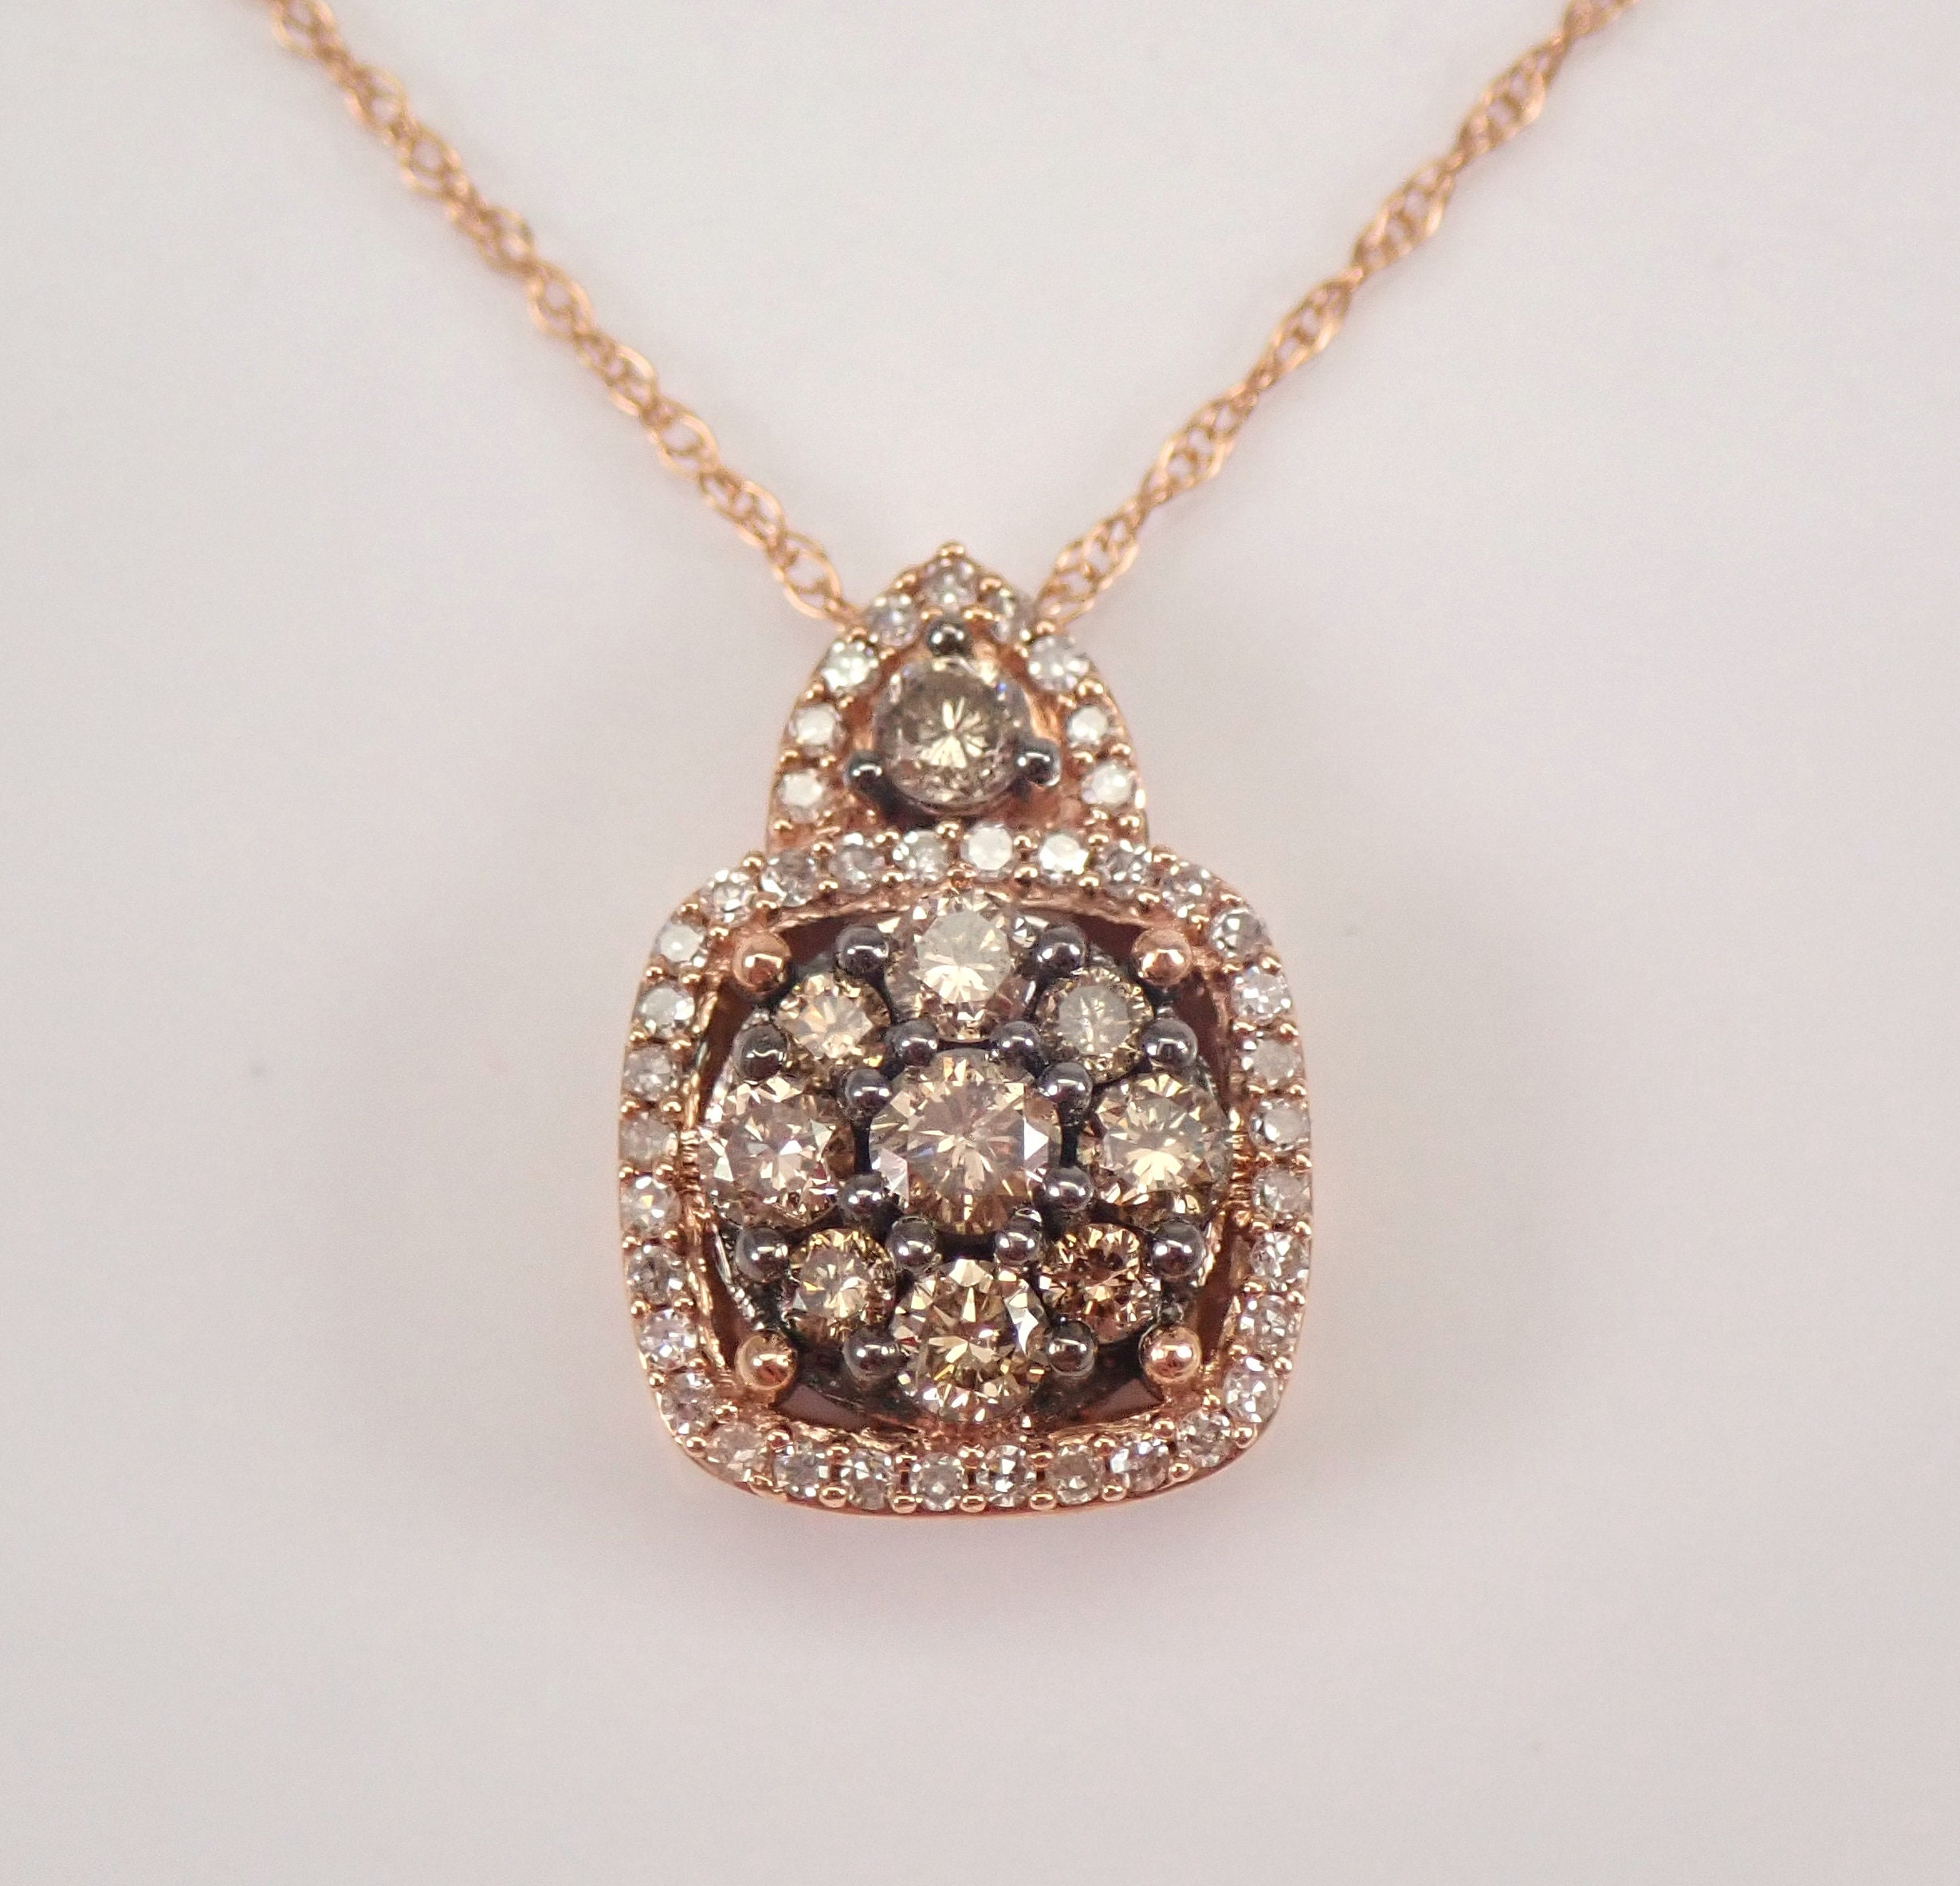 Ketan Jewellers - 10K Rose Gold Chain and Chocolate Diamond Pendant - SALE  SPECIAL $2499 CHRISTMAS SALE SPECIALS!!!!! ツ Like ✓ Comment ✓ Share ✓ Tag  Your Friends ツ GUARANTEED Best Selection